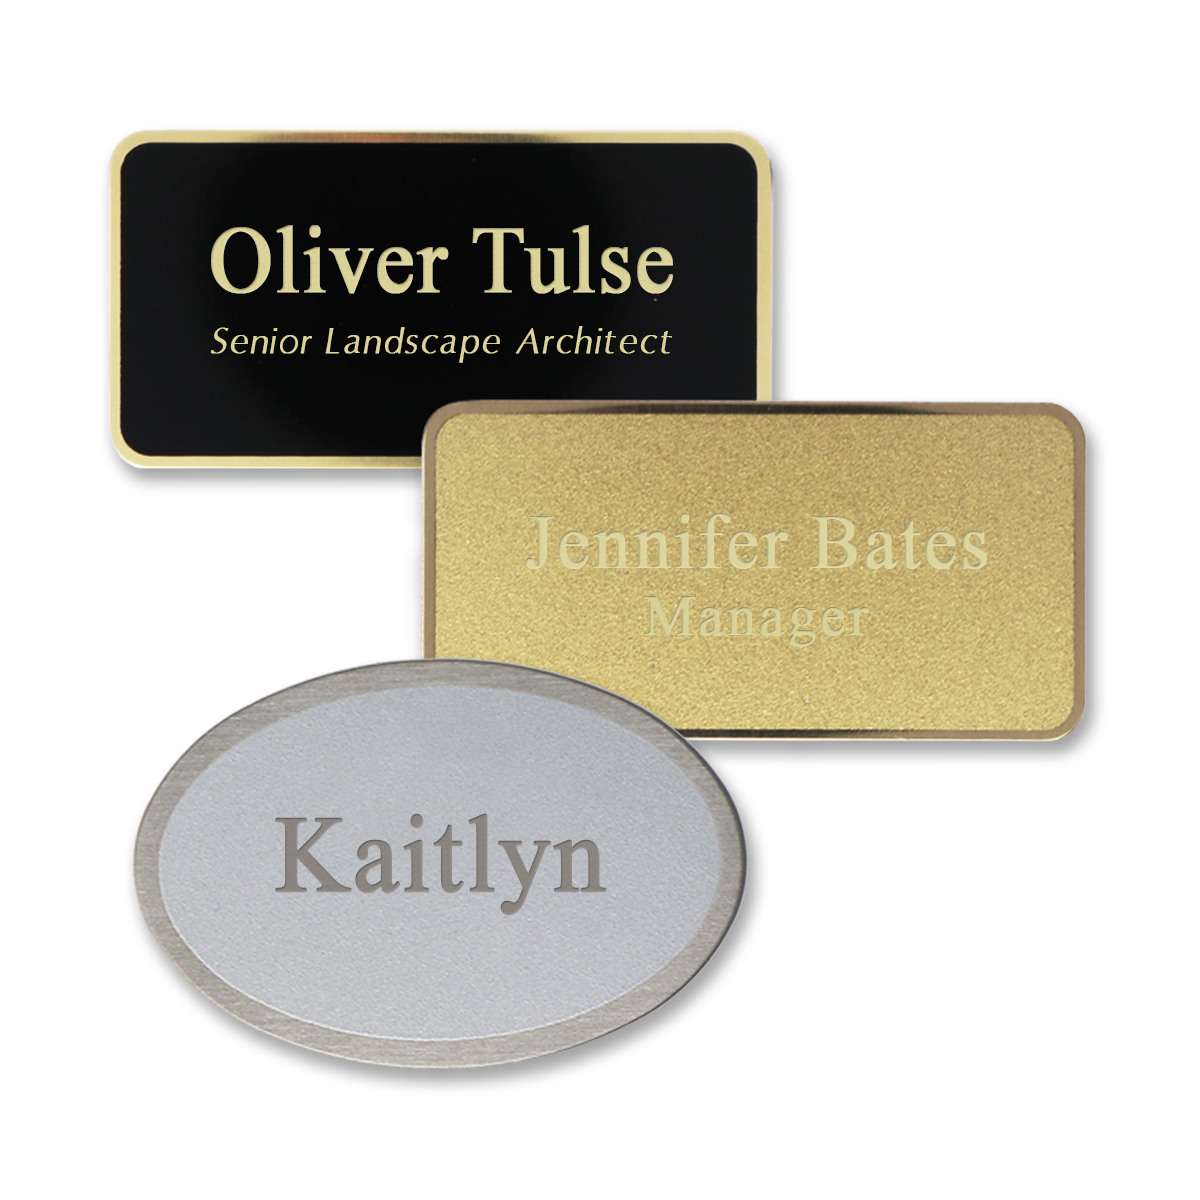 1 GOLD & 1 SILVER OVAL FORD PERSONALIZED NAME BADGES MAGNETIC FASTENER 